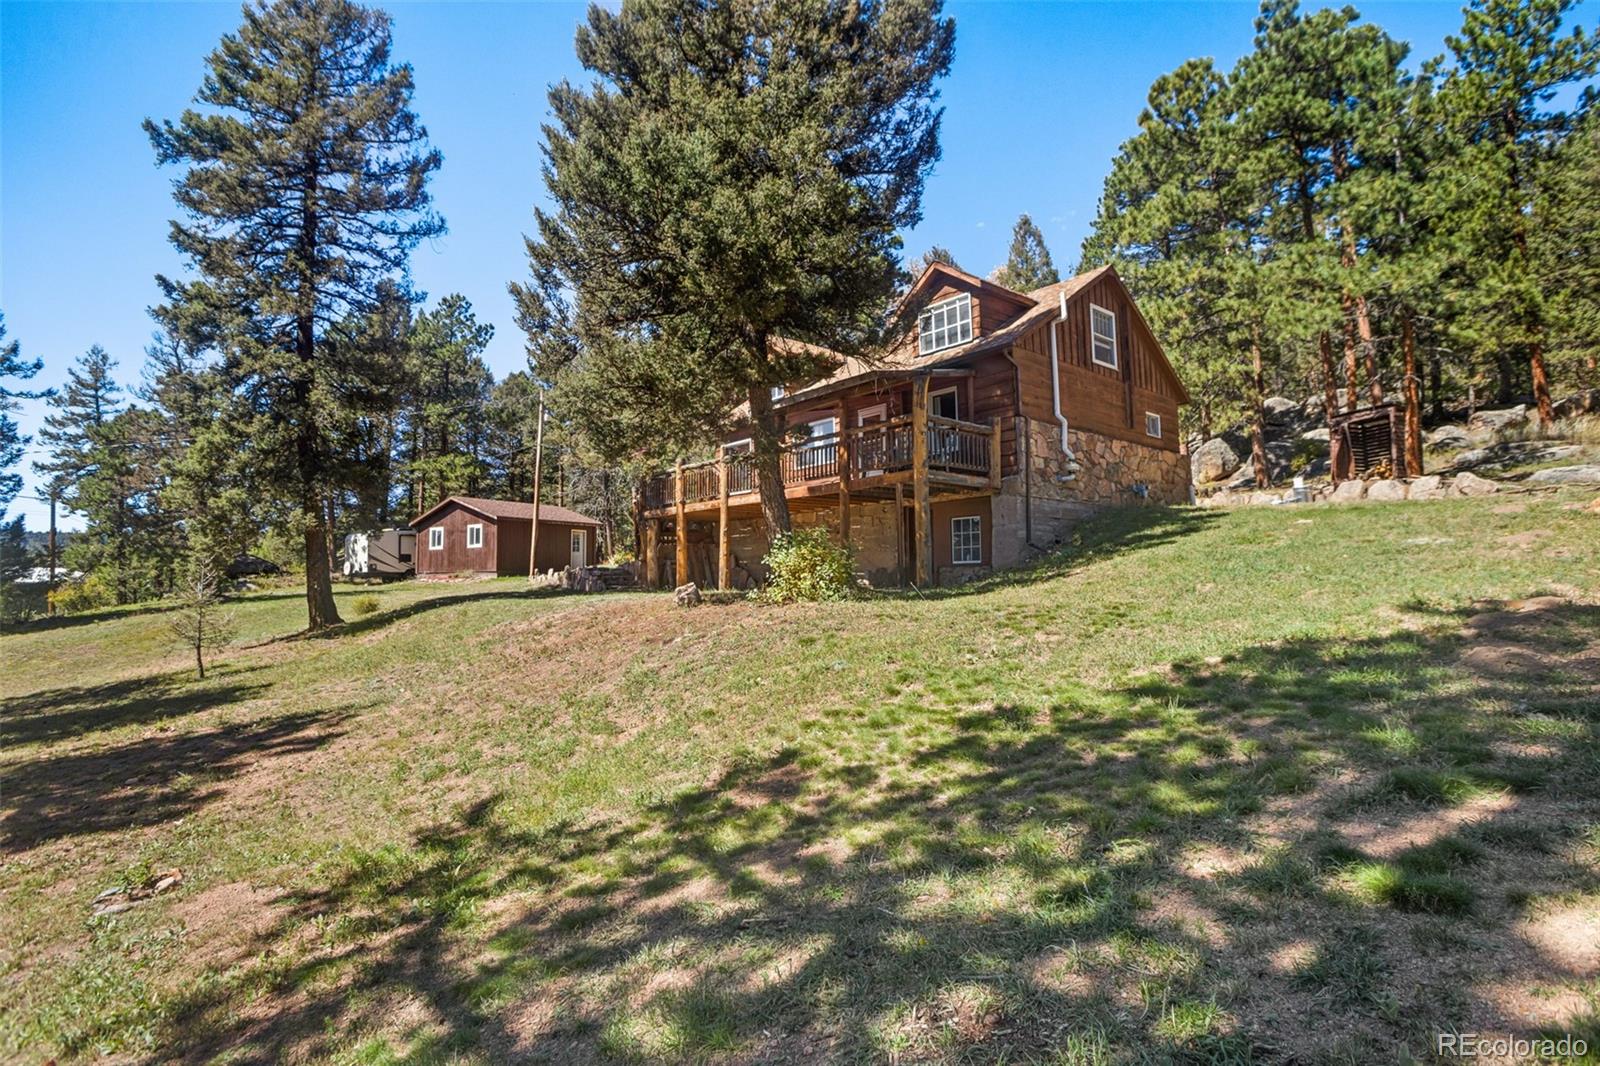 11595 S US HWY 285 Frontage Road, conifer MLS: 4284977 Beds: 3 Baths: 2 Price: $580,000